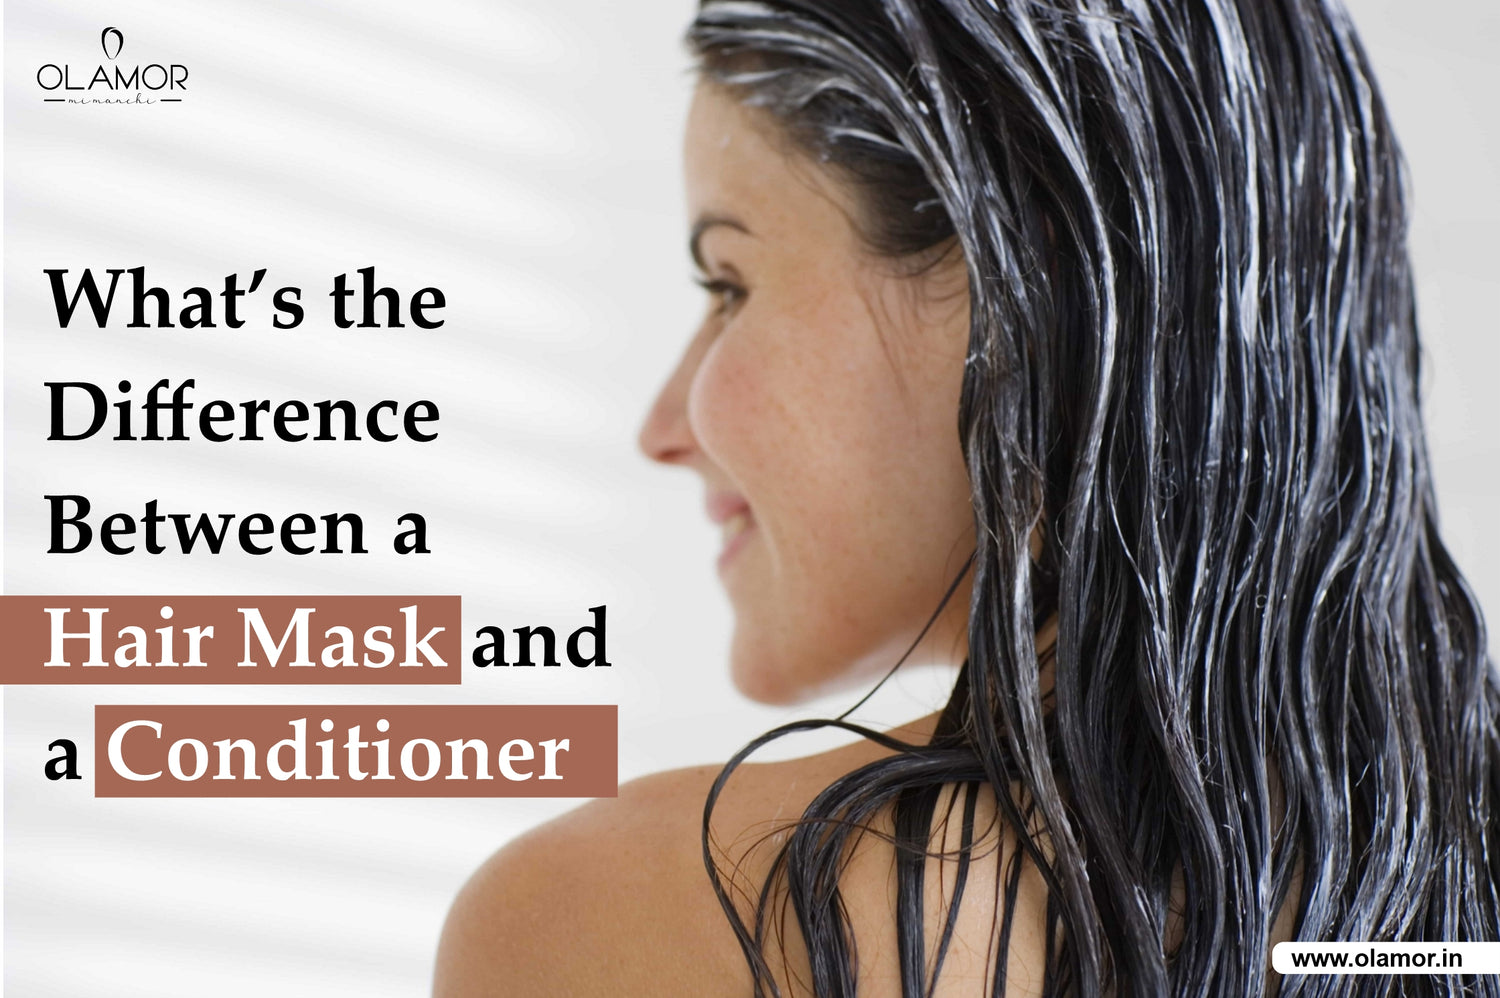 What’s the Difference Between a Hair Mask and a Conditioner